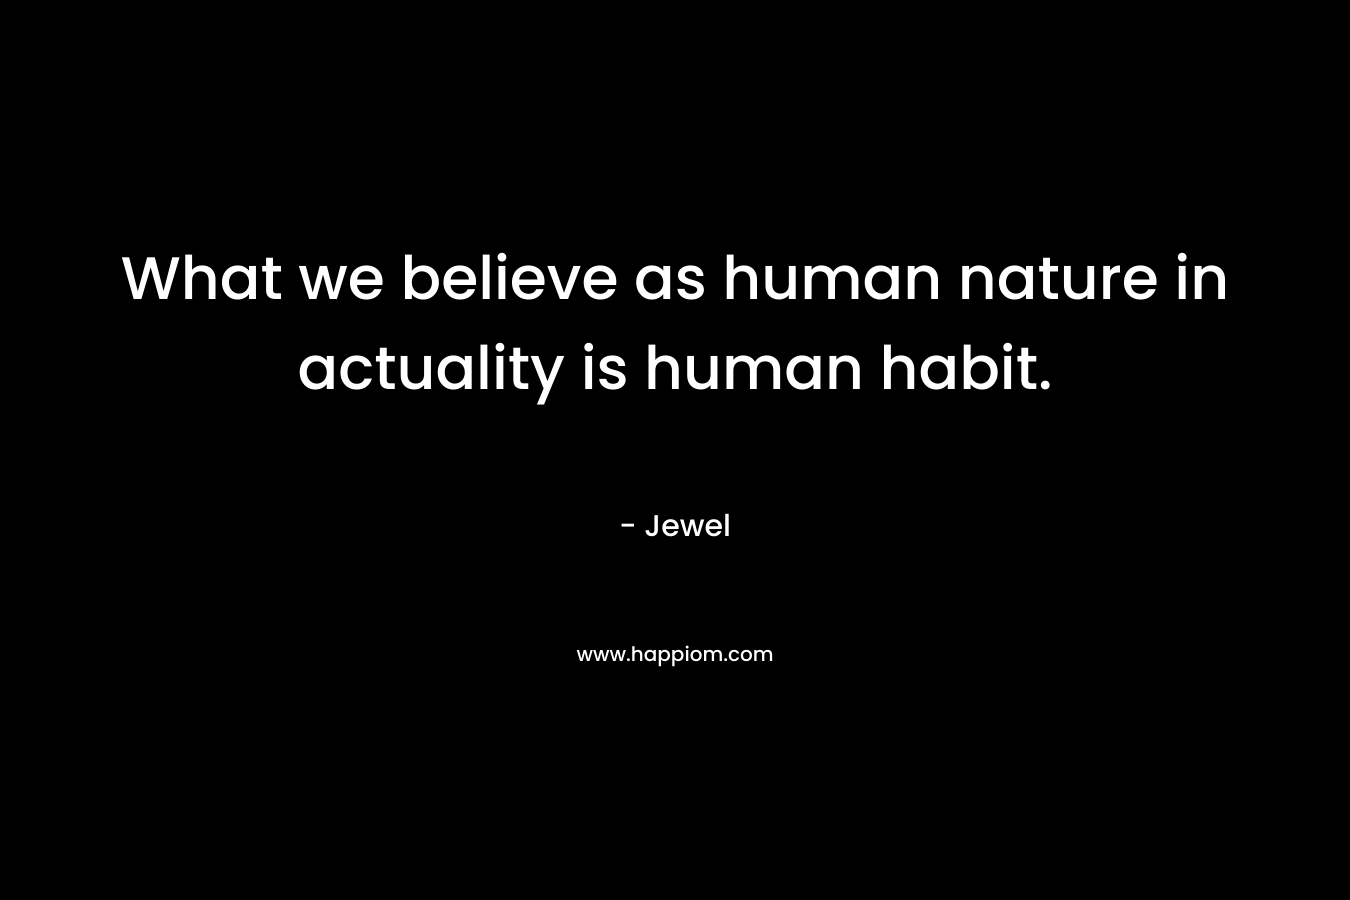 What we believe as human nature in actuality is human habit. – Jewel